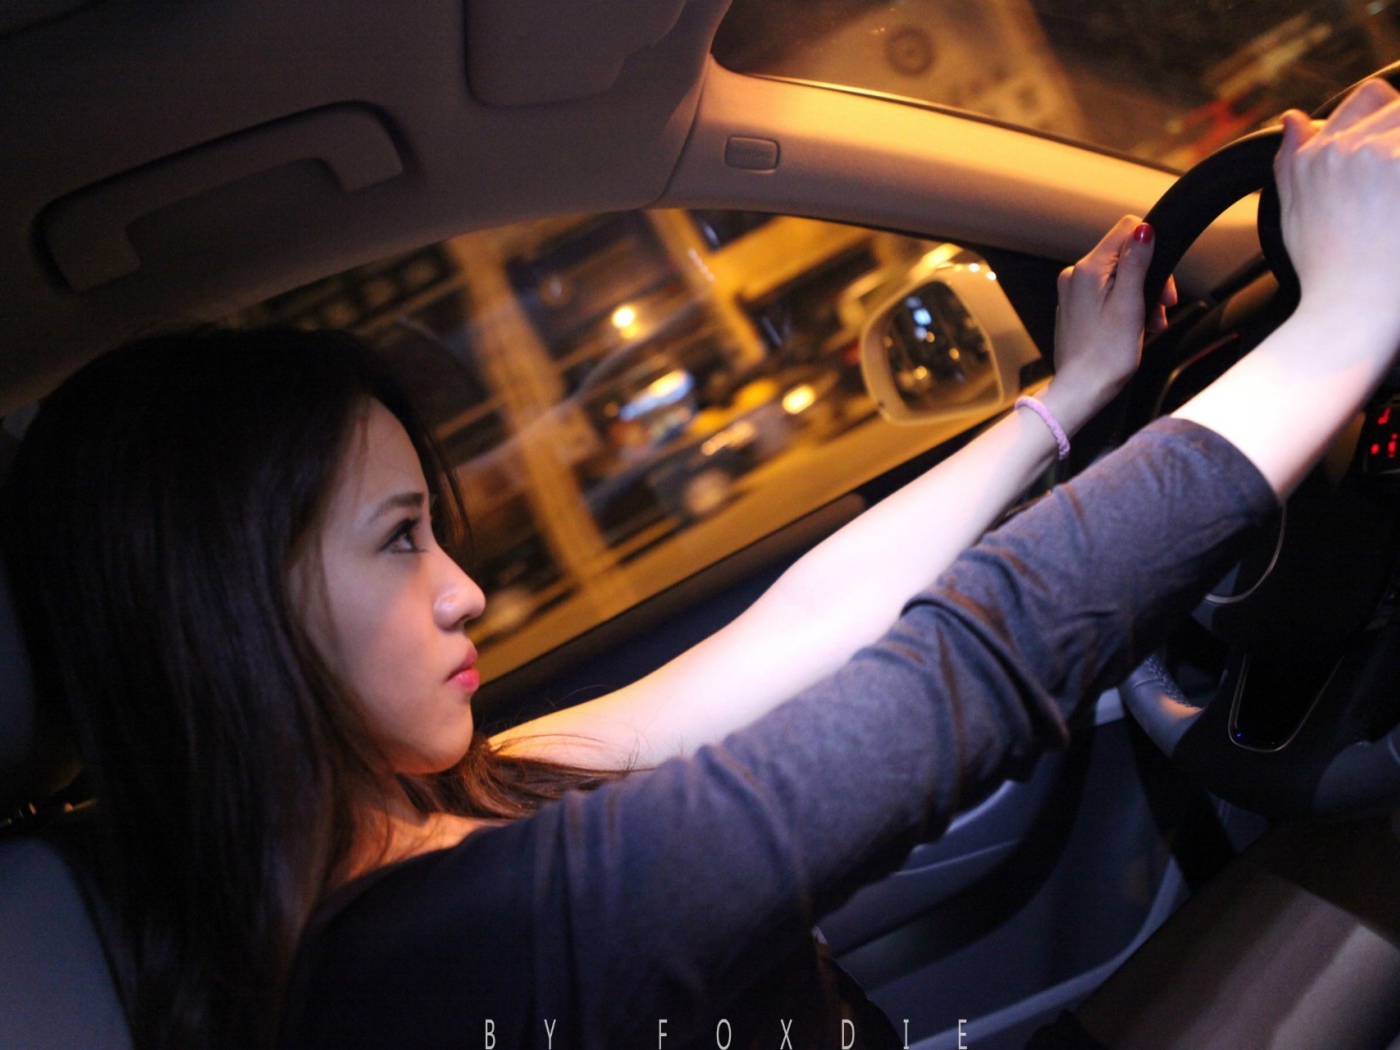 The girl behind the wheel racer Audi Q3